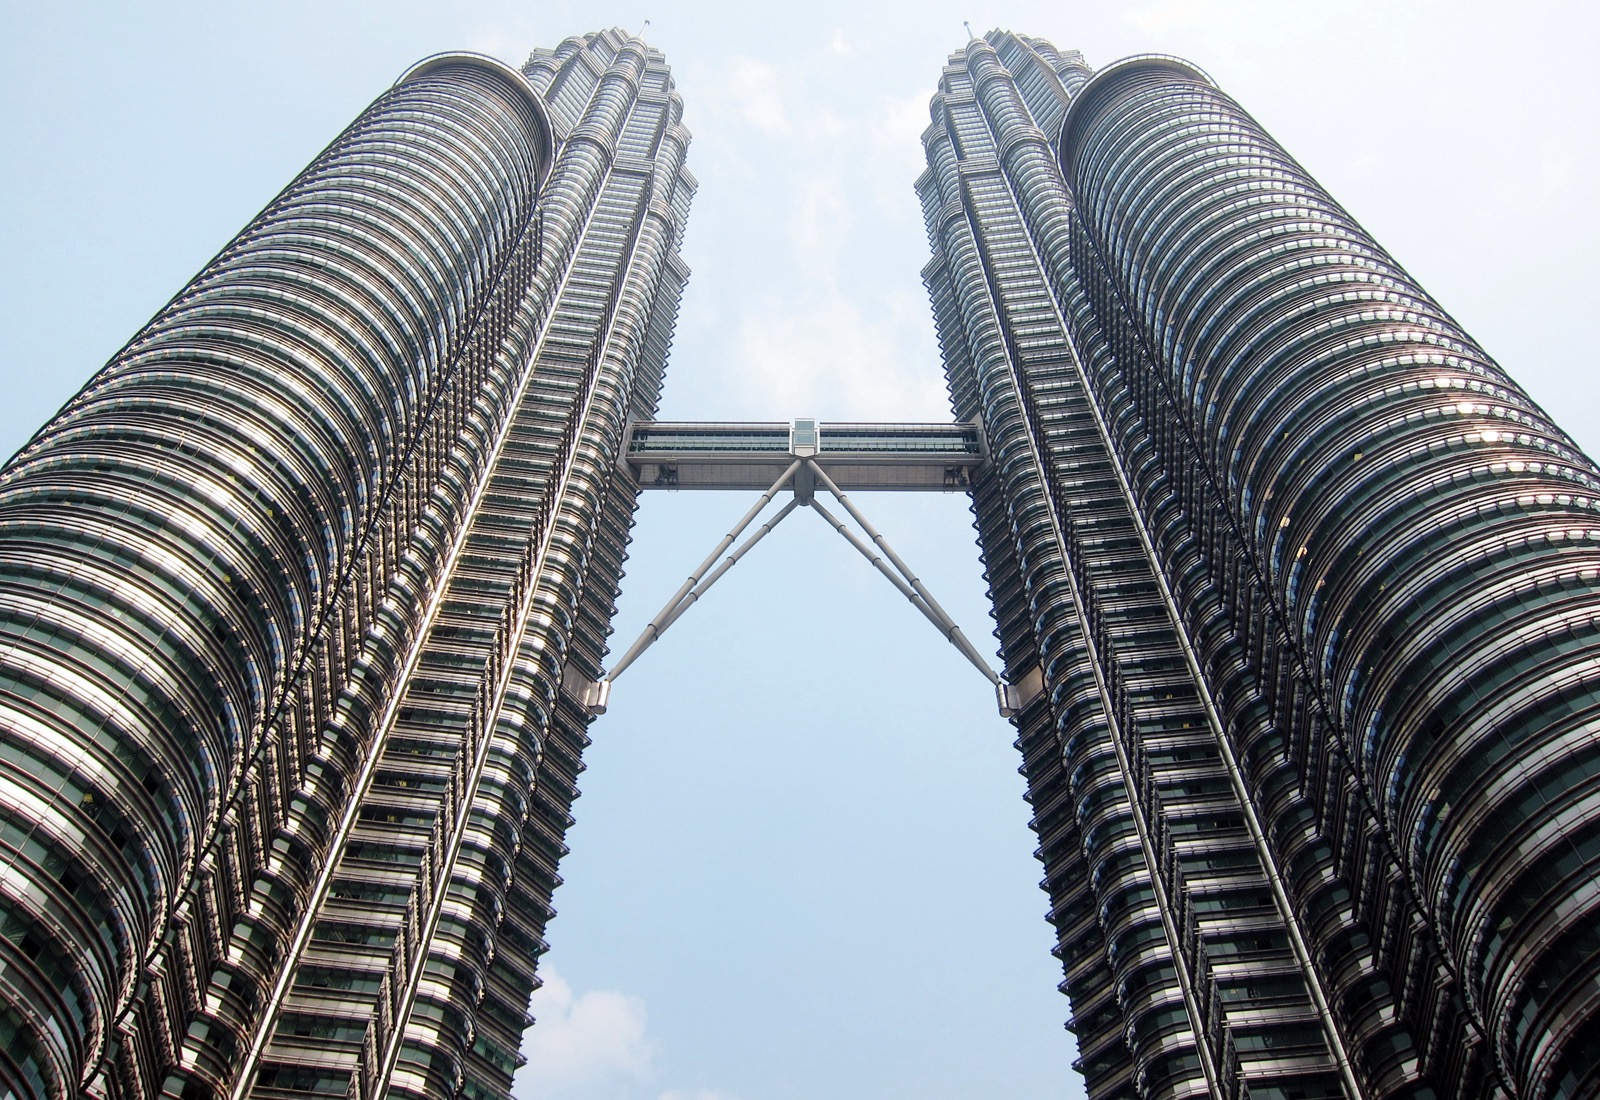 Amazing Petronas Towers Pictures & Backgrounds